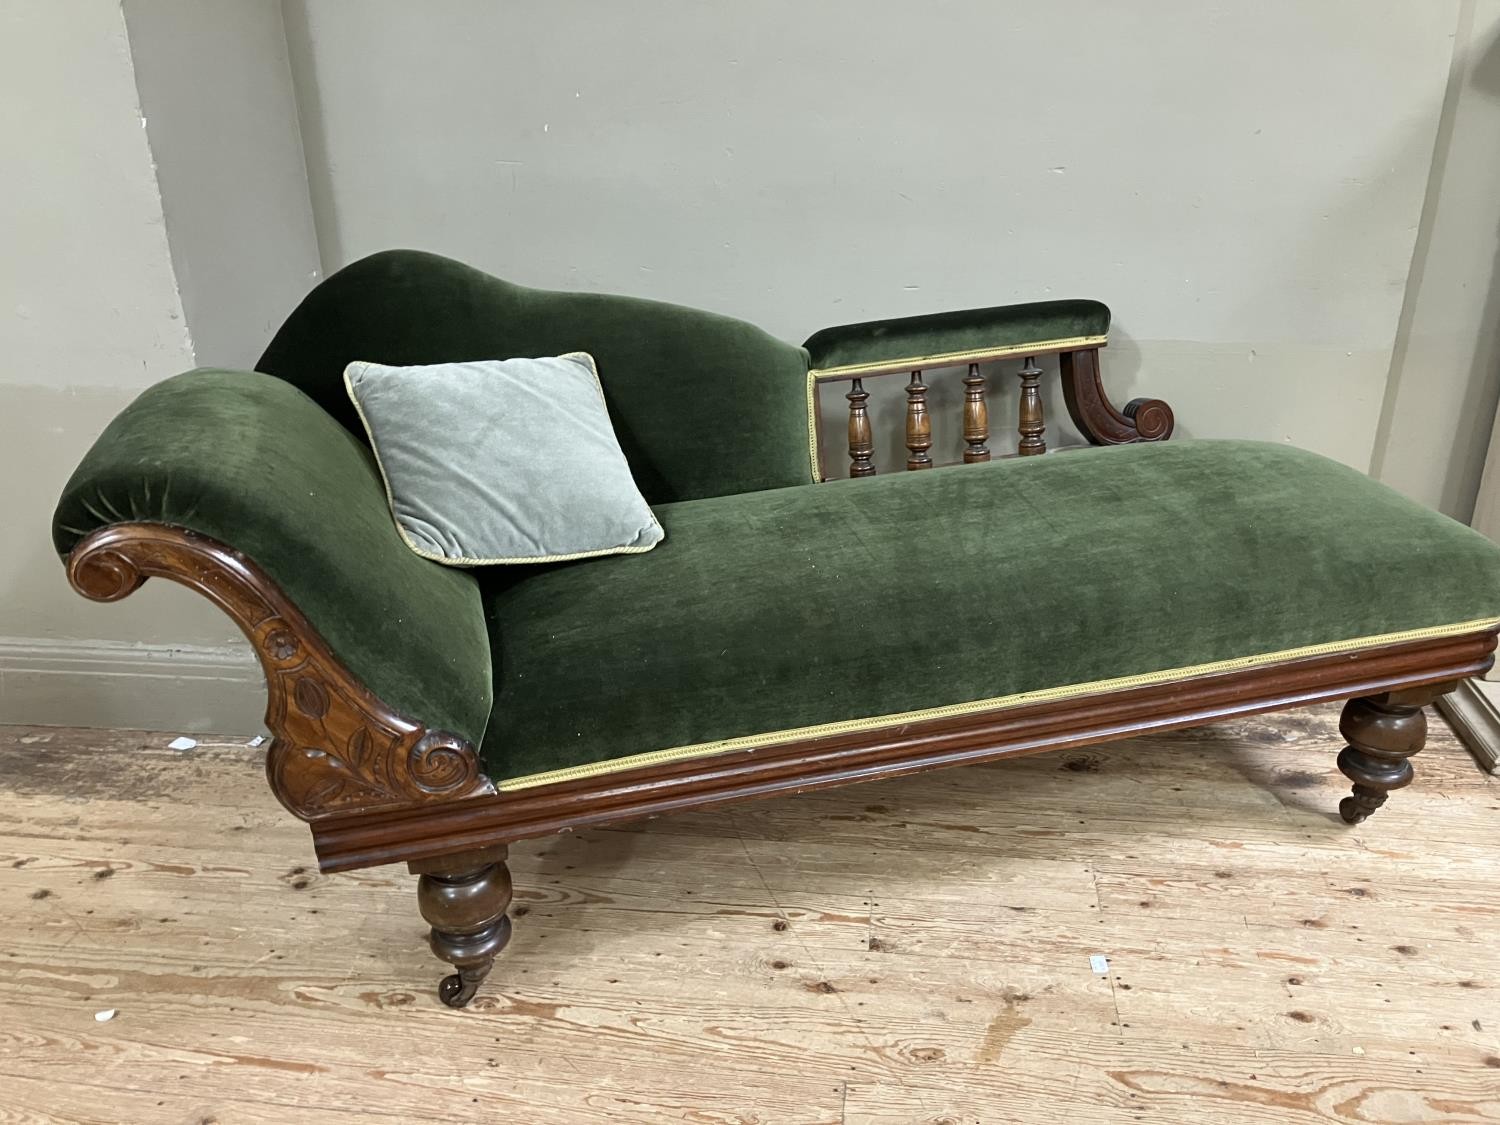 A Victorian walnut chaise longue upholstered in green velvet and on turned legs